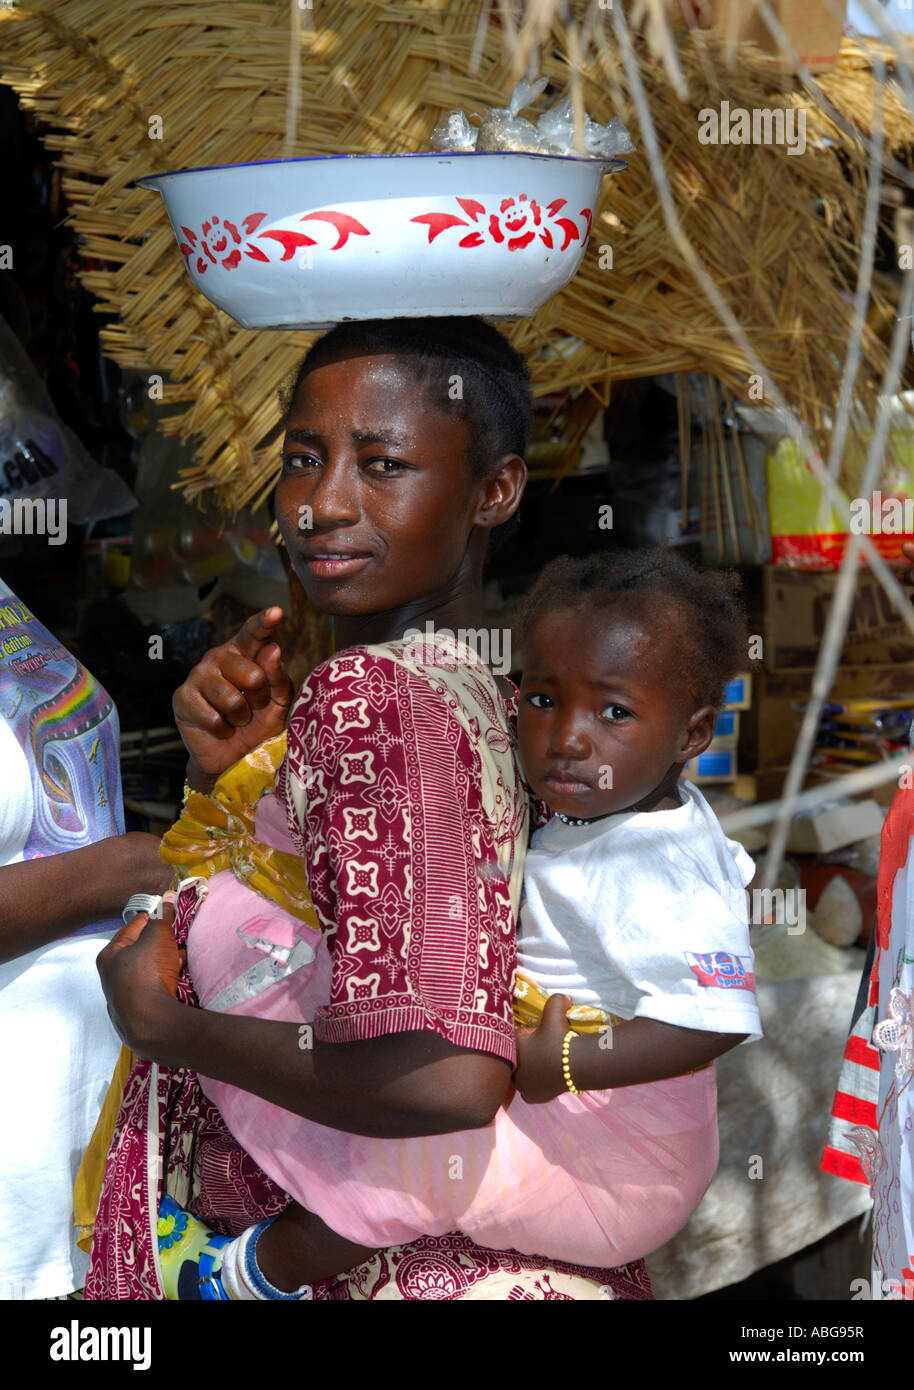 Young woman with toddler on the back balancing a bowl on her head, Burkina Faso Stock Photo